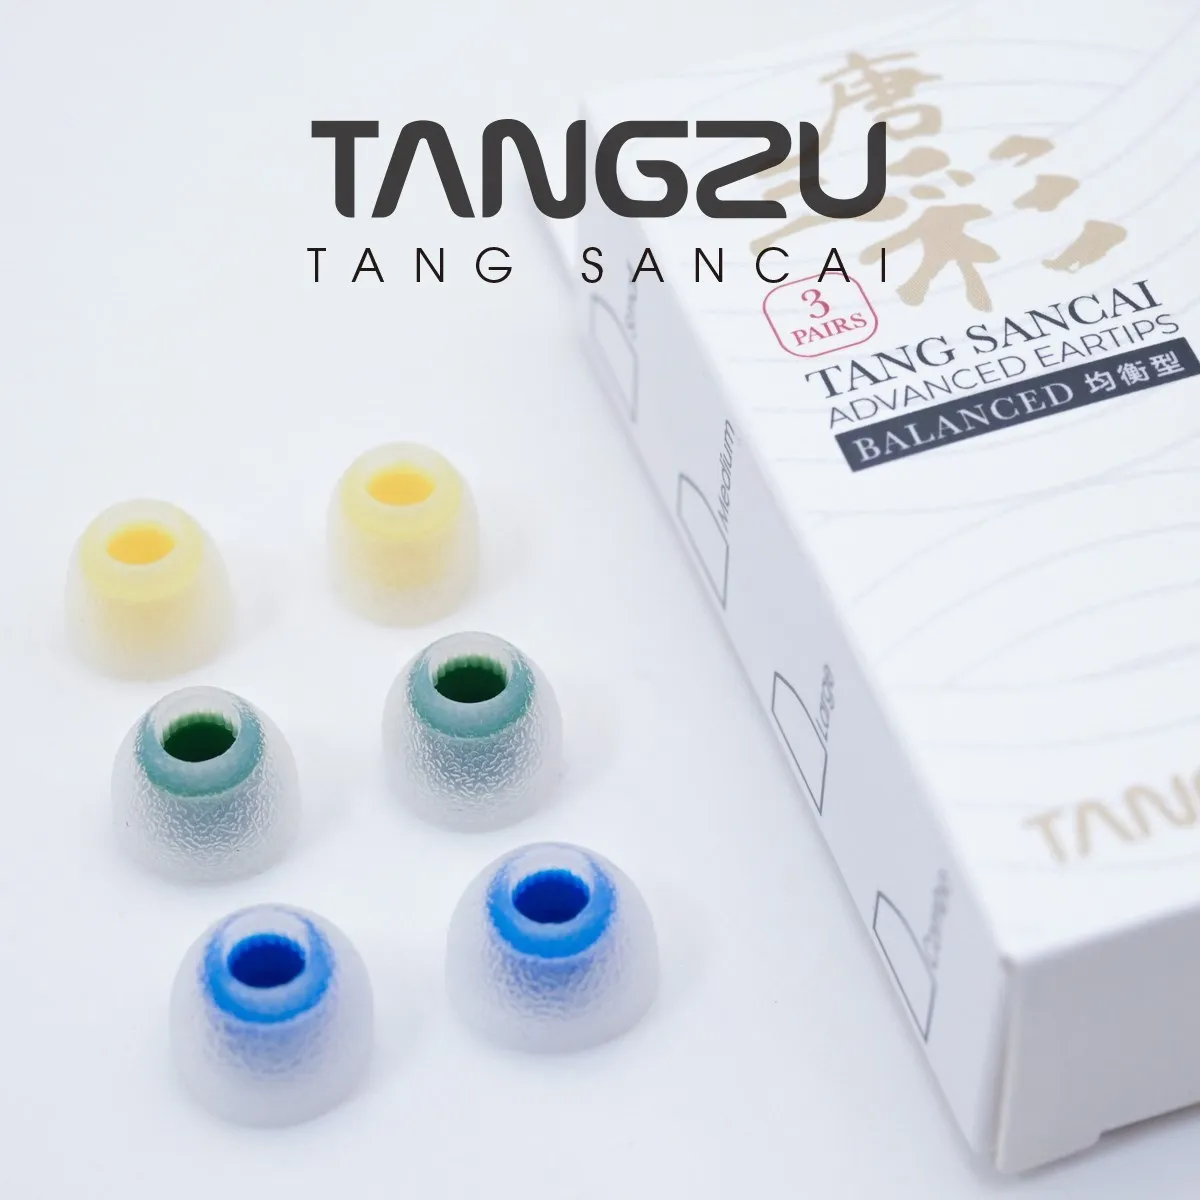 

Tangzu Tang Sancai Silicone Earphone Eartips 3Pairs for S/M/L Size Headphone Accessory Wired Headset Earbuds